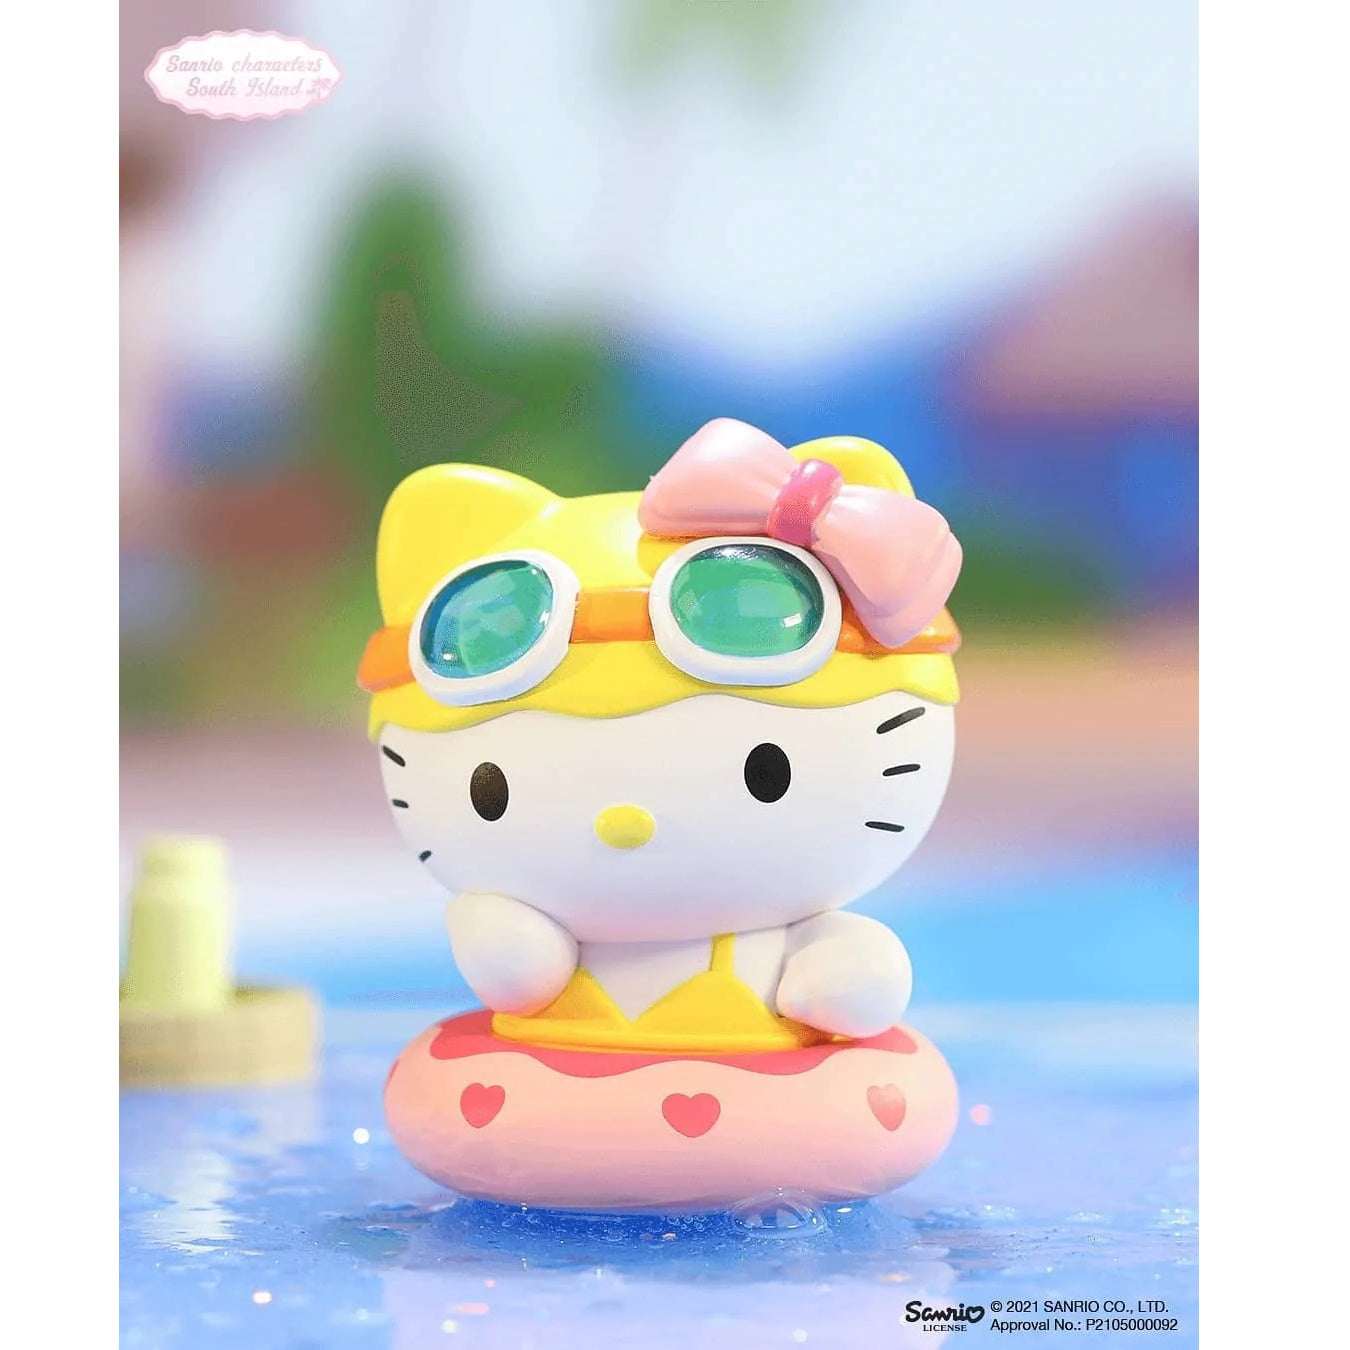 POP MART Sanrio Characters South Island Series-Single Box (Random)-Pop Mart-Ace Cards & Collectibles